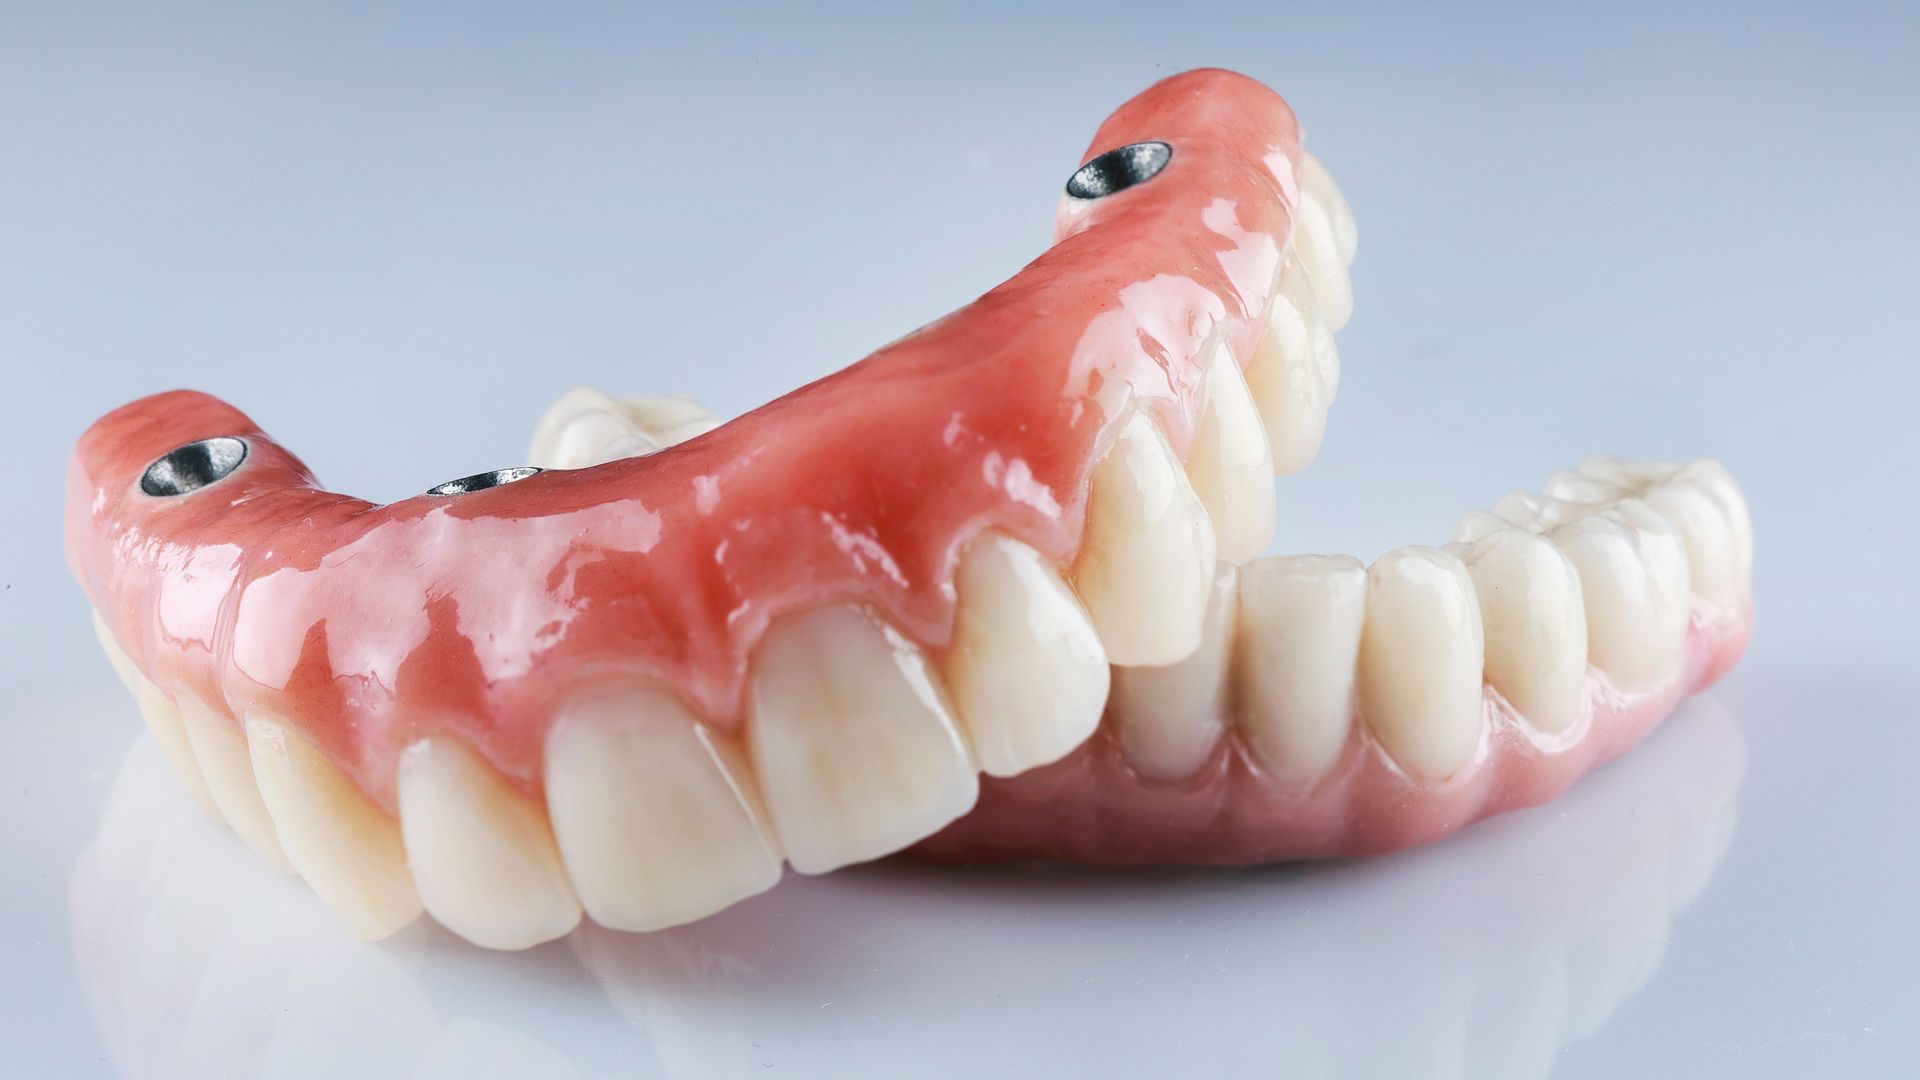 A close up of a denture on a table.